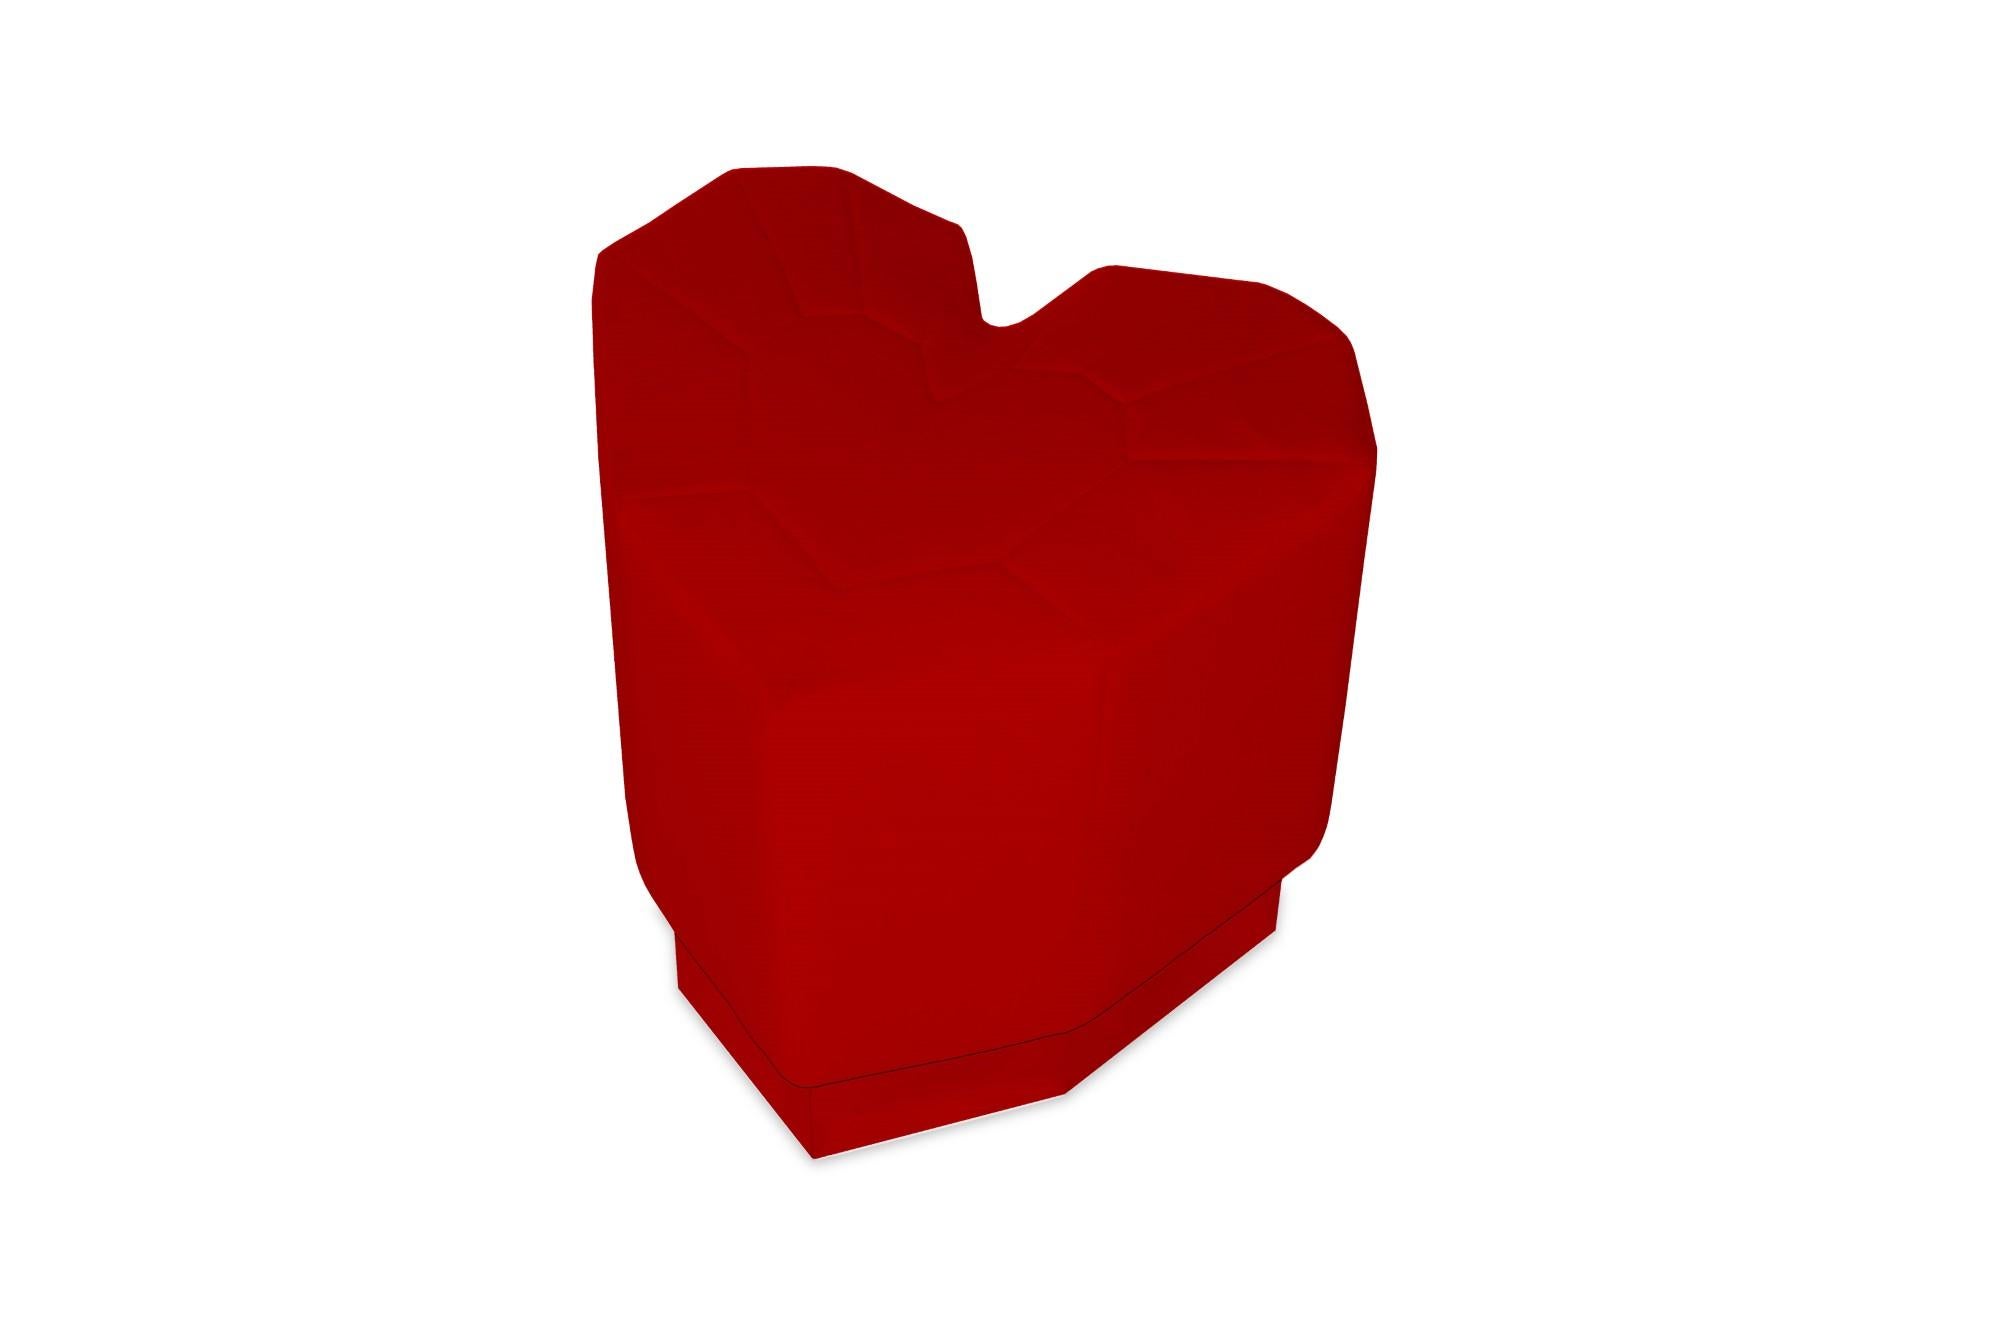 Queen heart varese scarlet stool by Royal Stranger
Dimensions: D 44 x W 49 x H 49 cm.
Different upholstery colors and finishes are available. Brass, copper or stainless steel in polished or brushed finish.
Materials: Heart shape upholstery on top